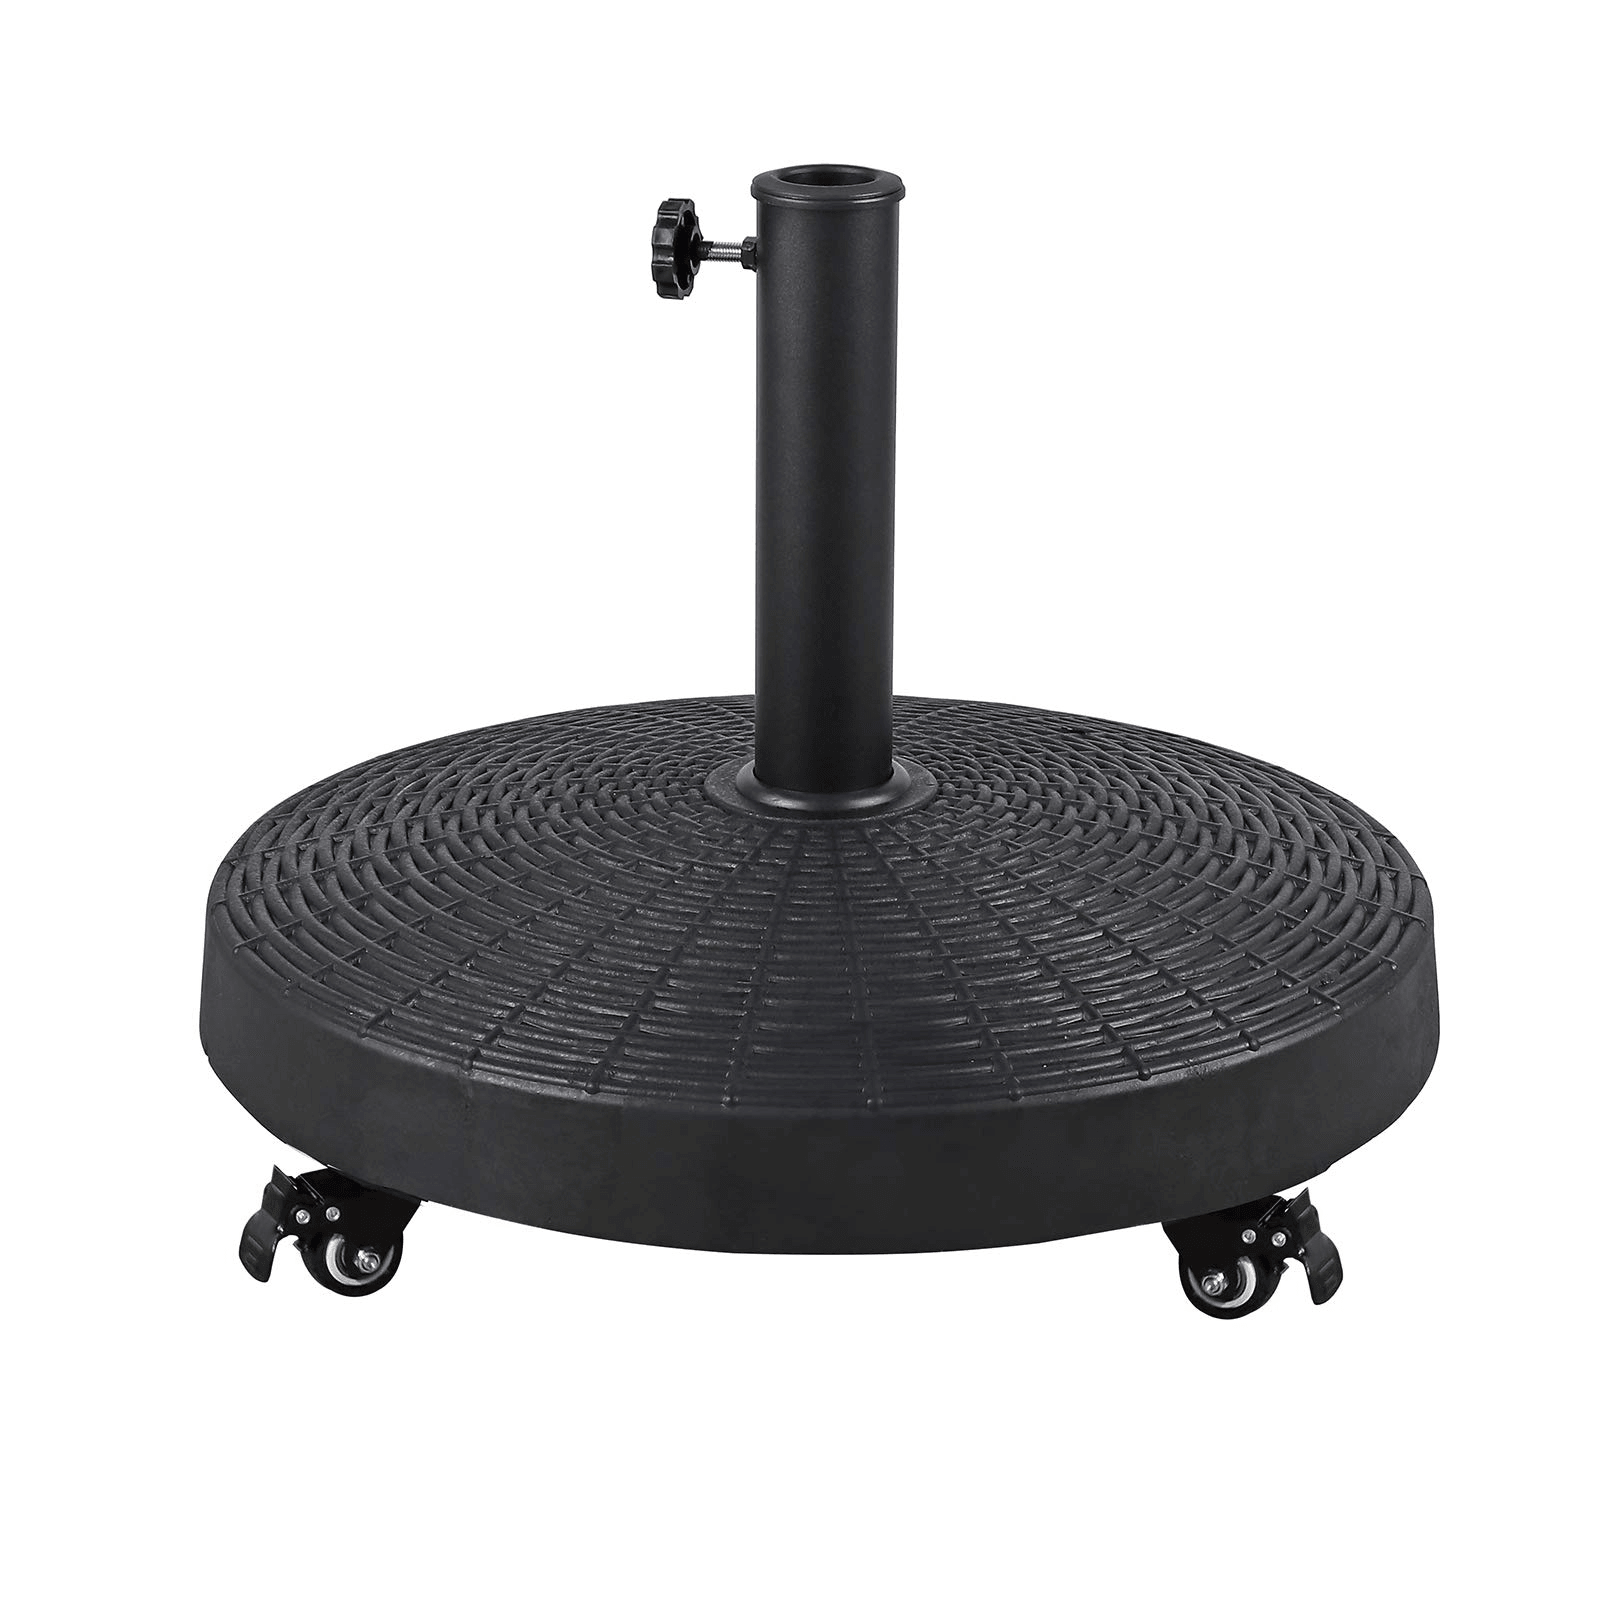 Patio Umbrella Base with Wheels, Heavy-Duty Stand Resin Weights for Outdoor Market Umbrella, 52lbs, Black best sale - OrangeCasual